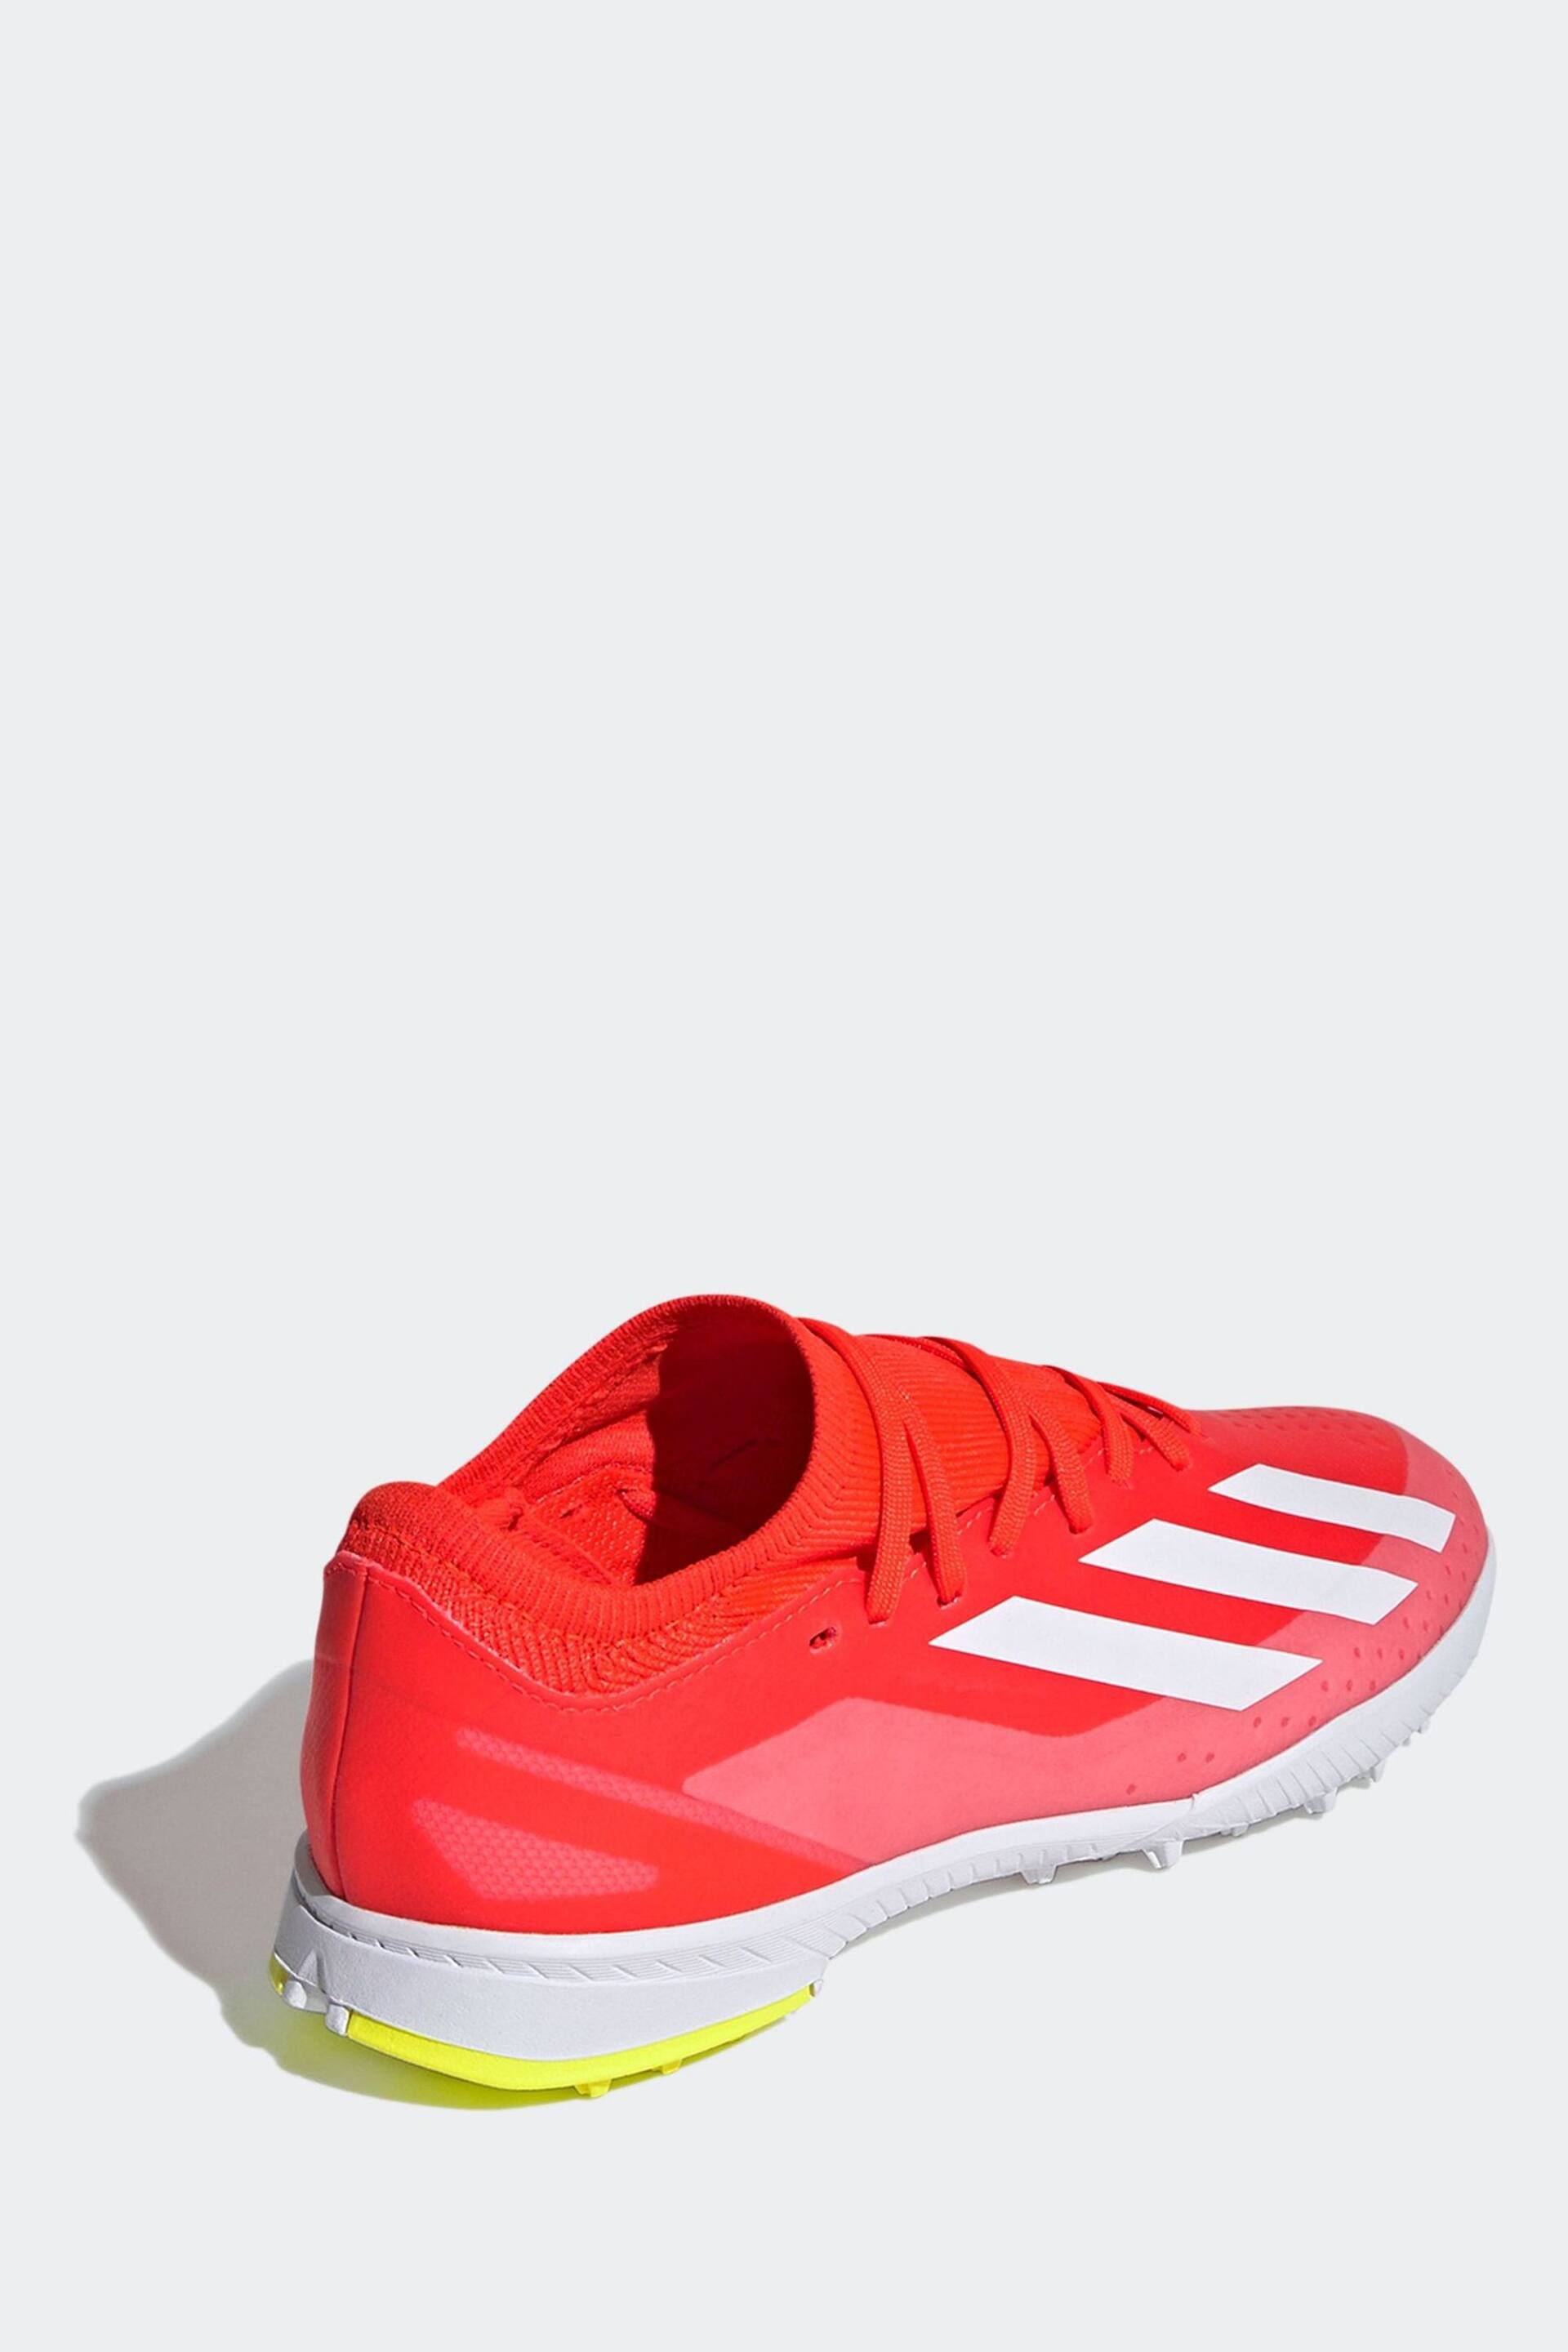 adidas Red/White Football X Crazyfast League Turf Kids Boots - Image 4 of 10